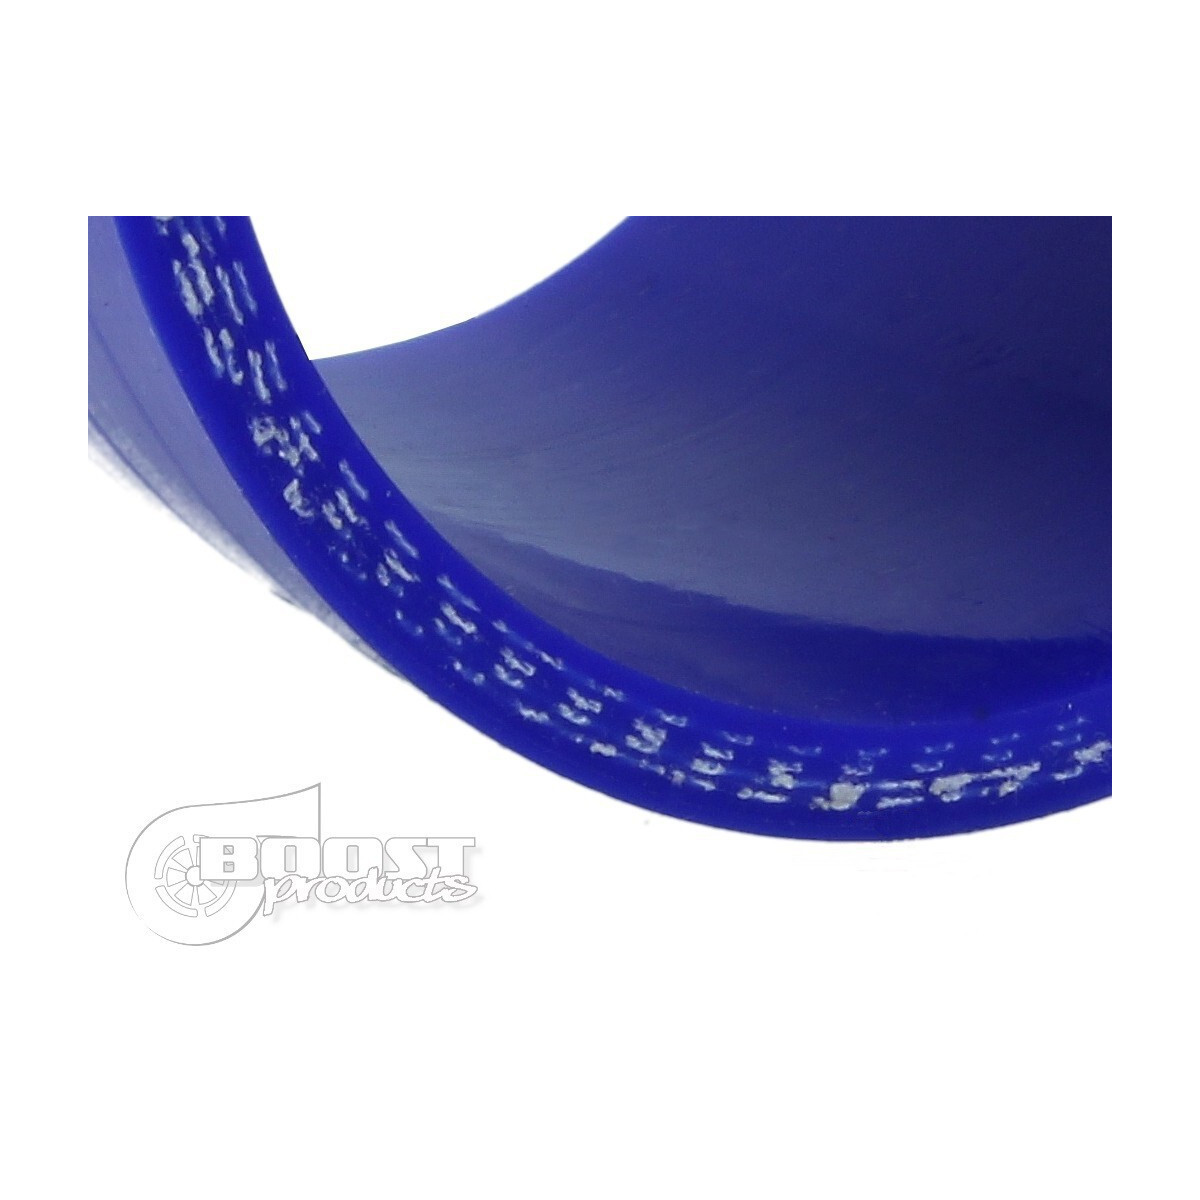 BOOST products Silicone elbow 45°, 45mm, blue